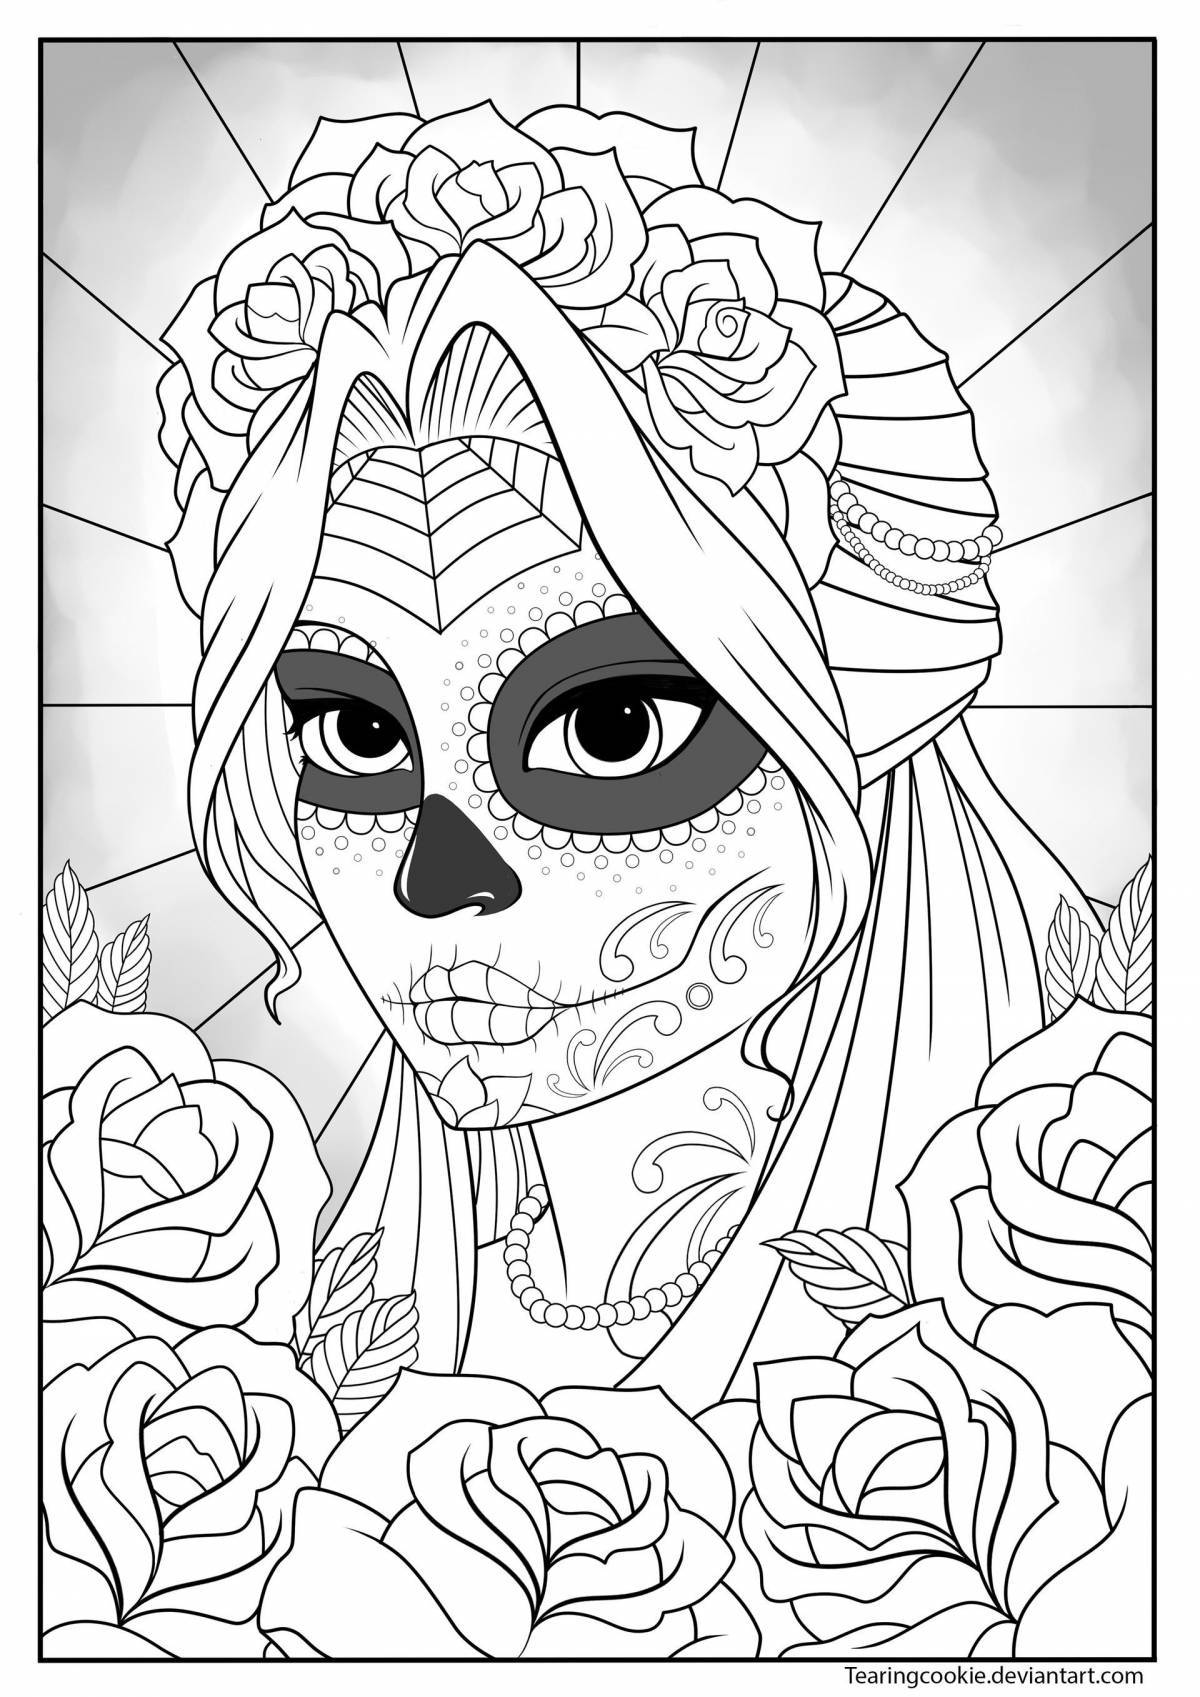 Incomprehensible horror coloring book